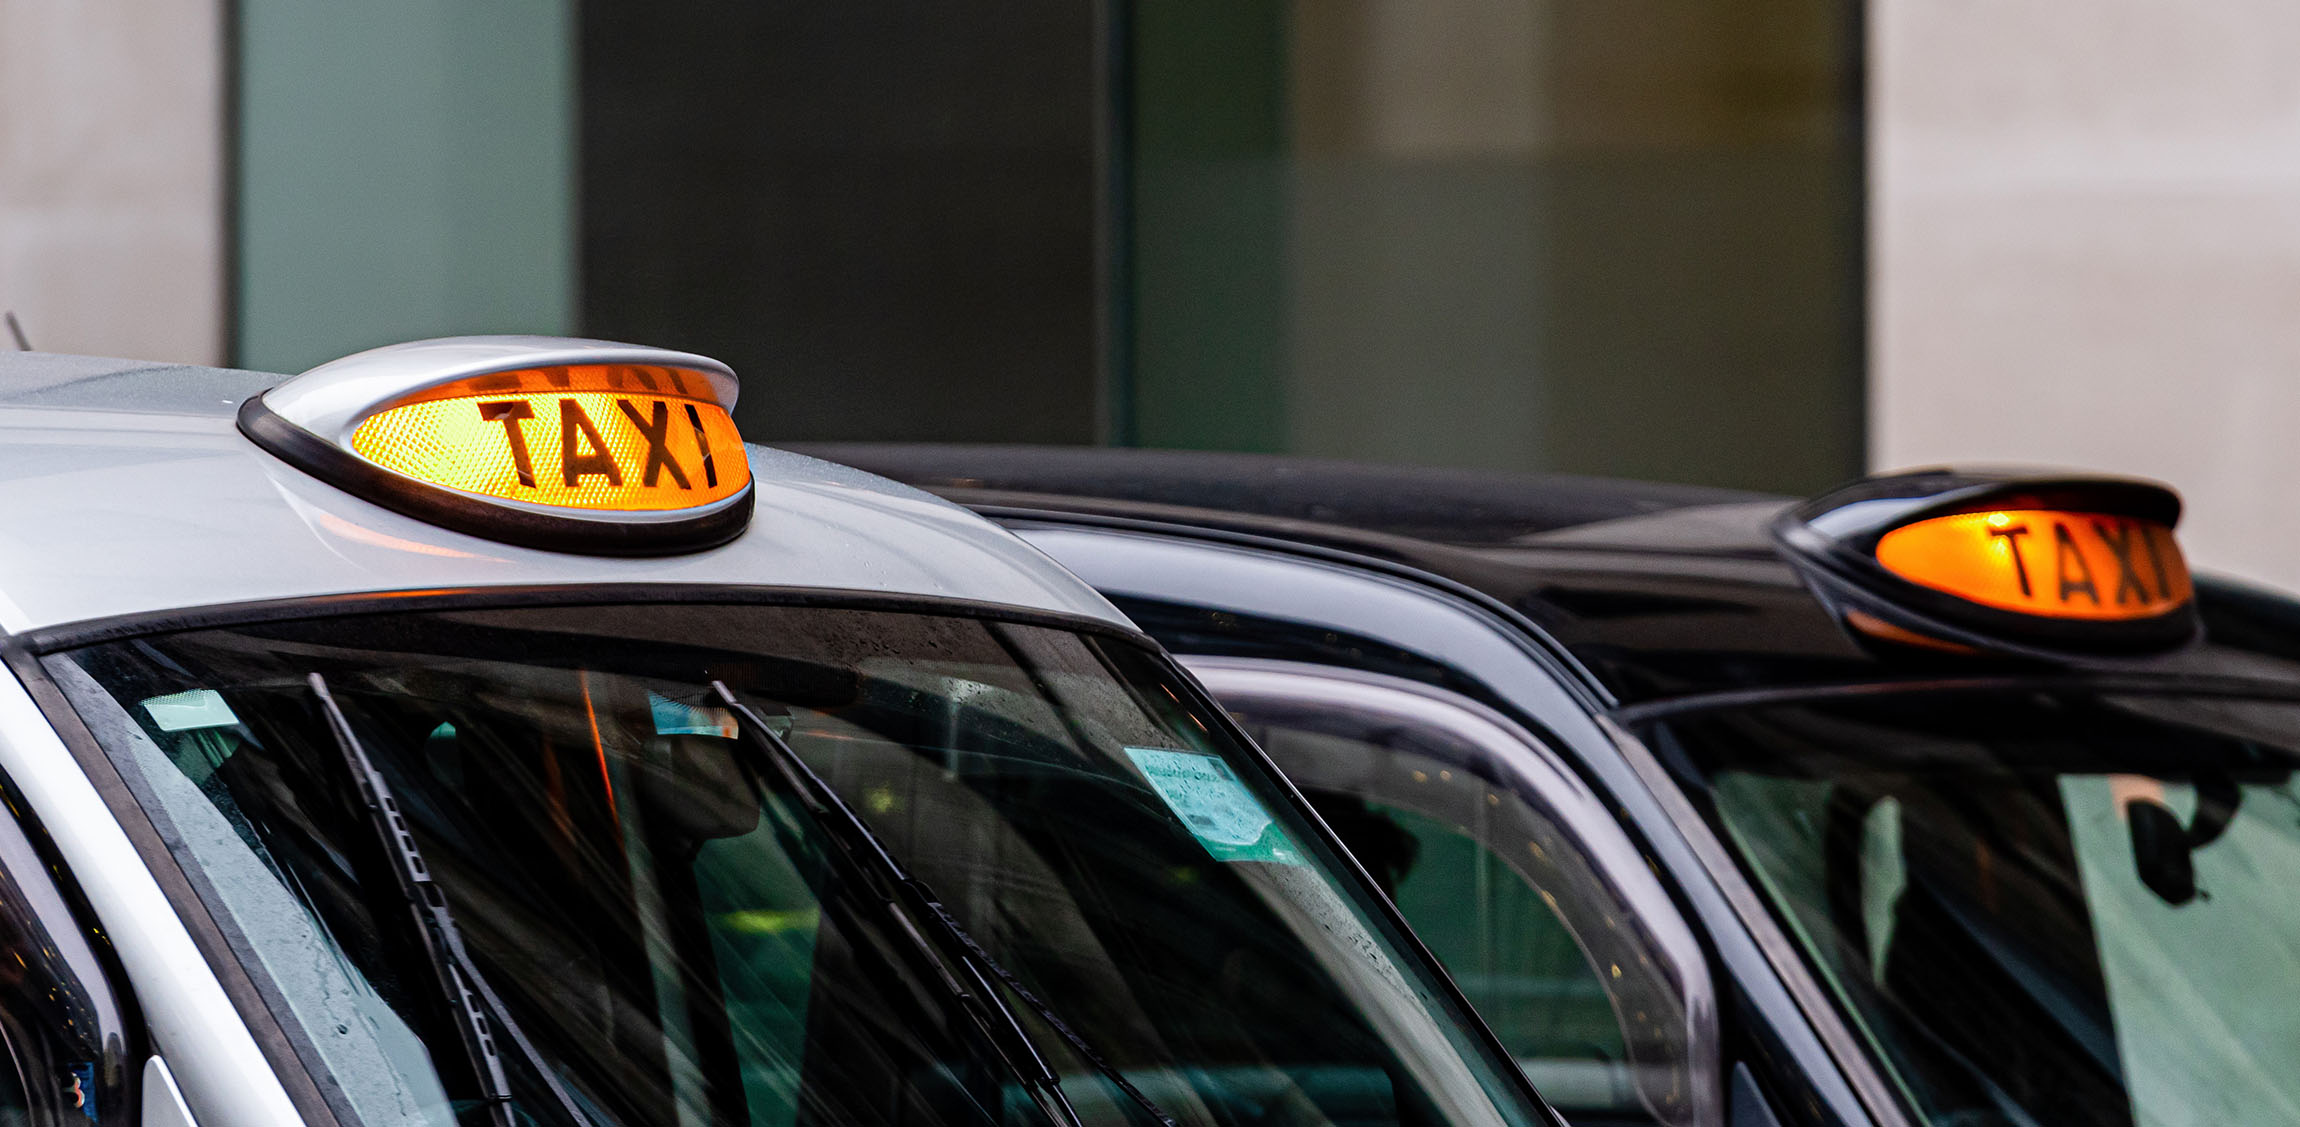 accidents involving taxis compensation claim solicitors Aberdeen